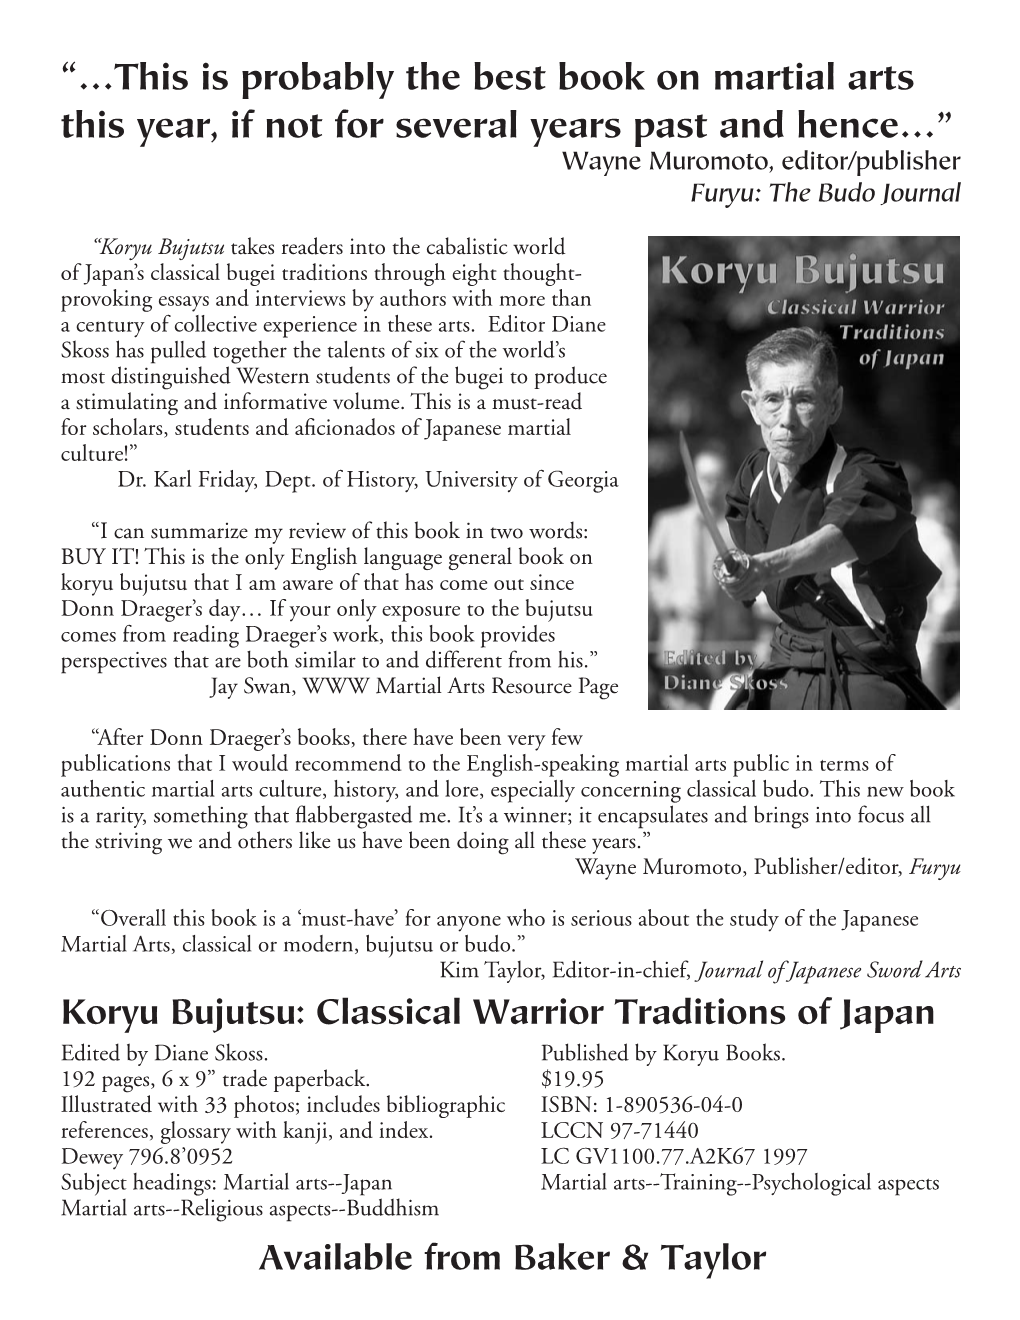 This Is Probably the Best Book on Martial Arts This Year, If Not for Several Years Past and Hence…” Wayne Muromoto, Editor/Publisher Furyu: the Budo Journal